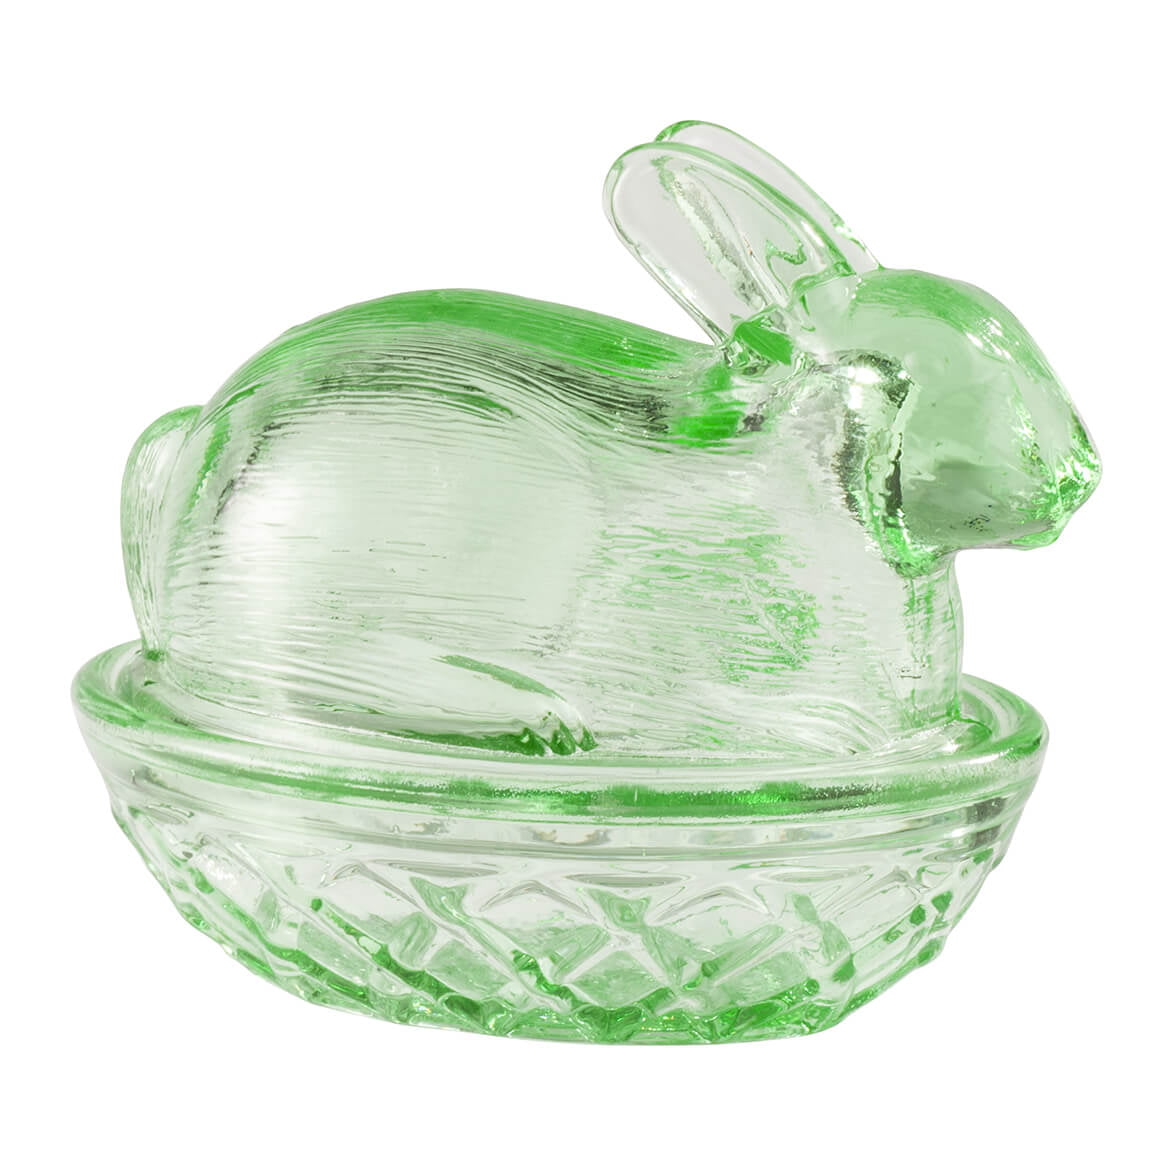 William Roberts Glass Bunny Candy Dish, Green, 2 Piece Set.